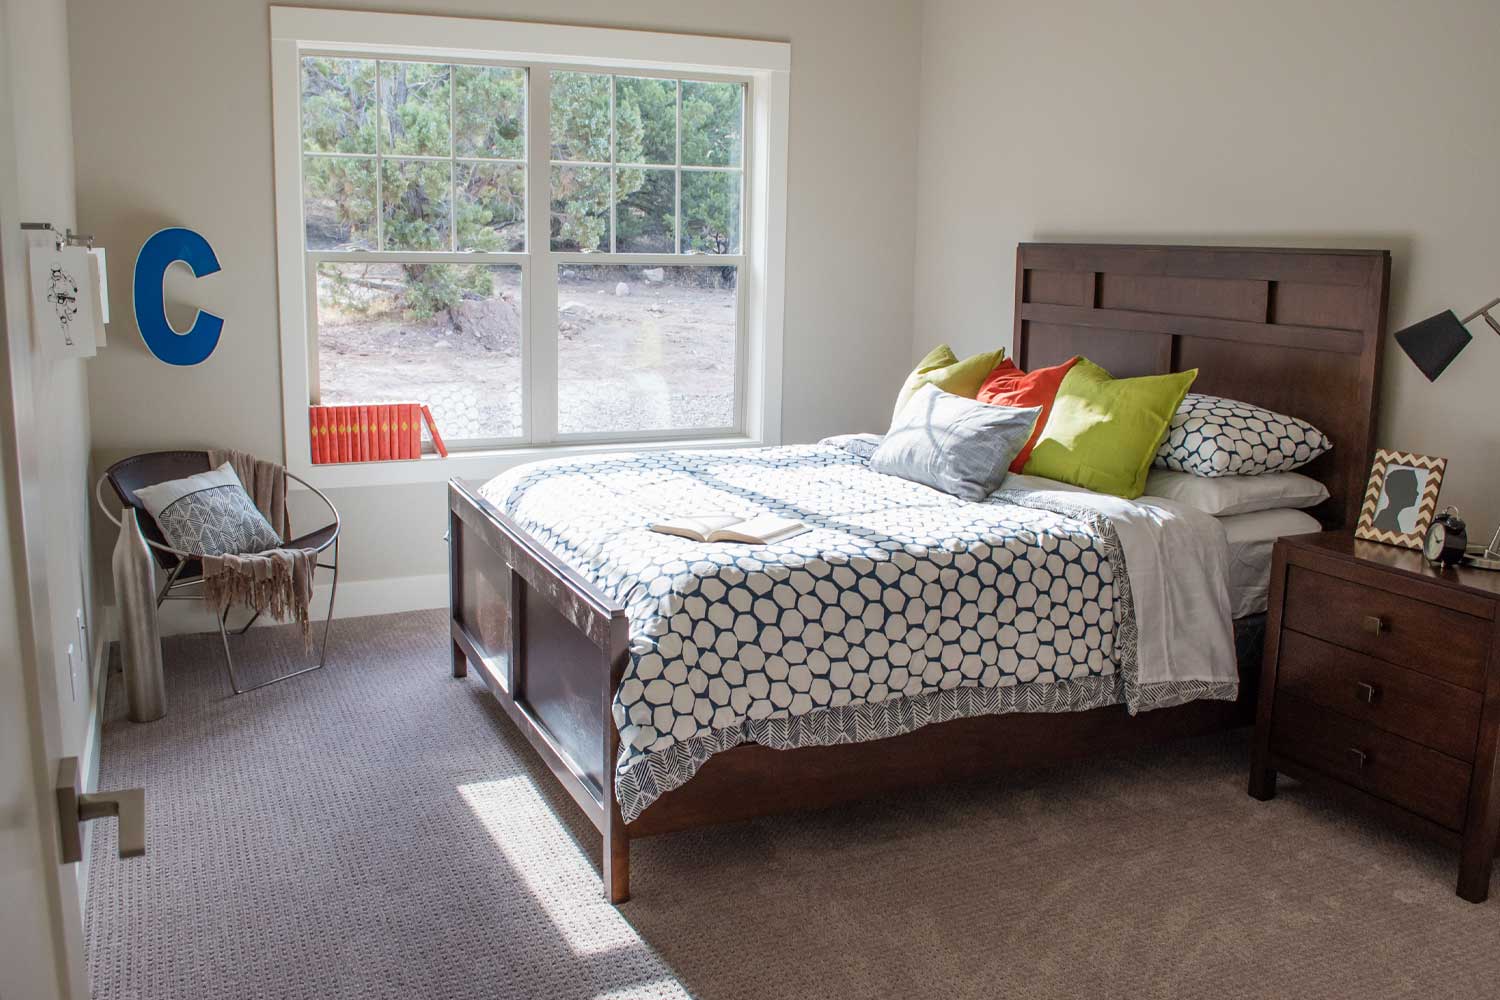 spare room with one queen size bed, dark wood bedframe, bright natural light come from main window that looks out into backyard